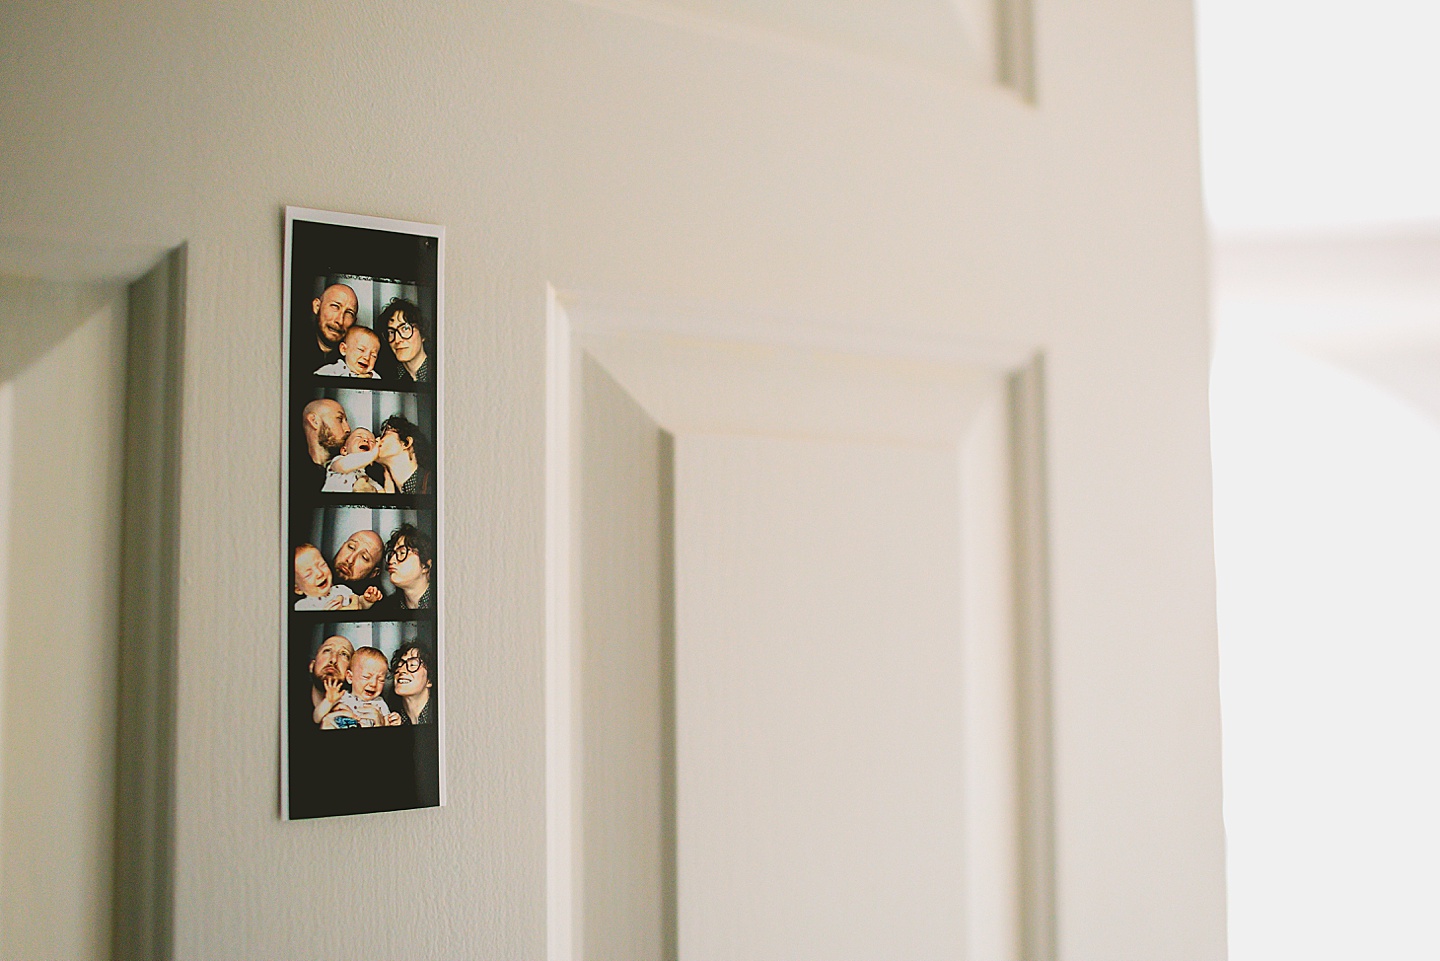 Photobooth pictures hung on door